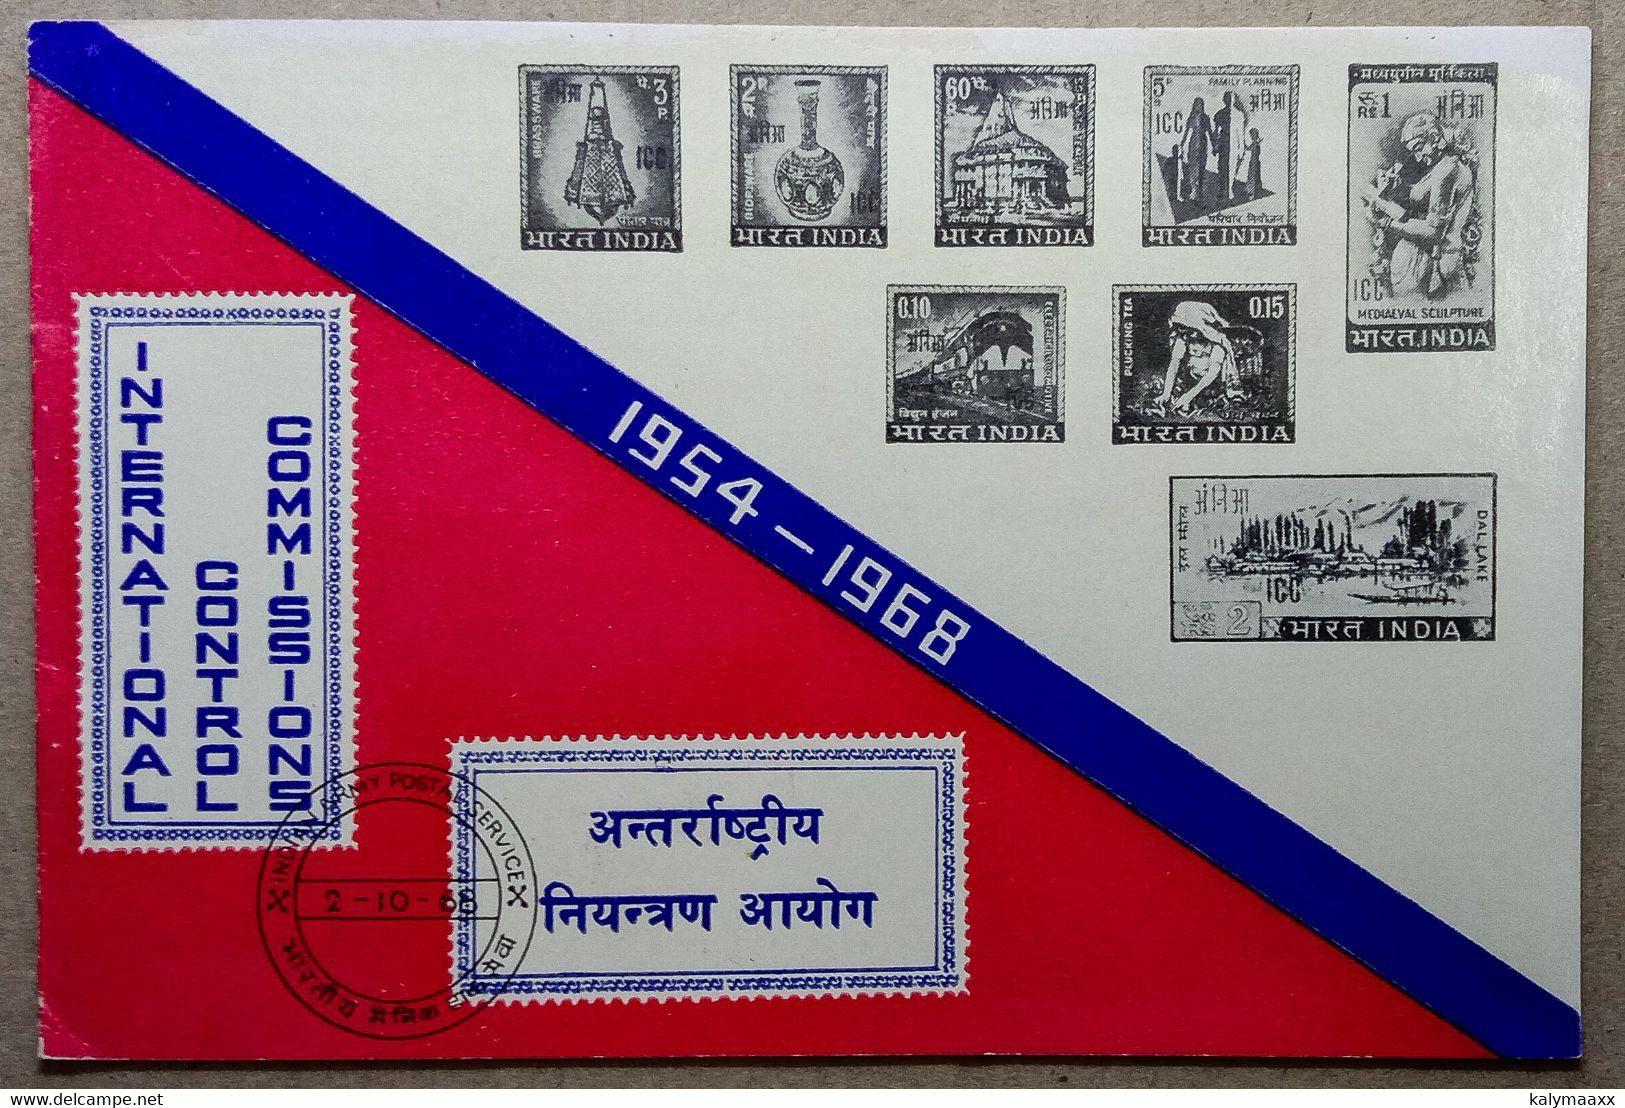 INDIA 1968 ICC OVERPRINTED COMPLETE SET OF 2 F.P.O CANCELLED COVERS & INFORMATION BROCHURE, VIETNAM, LAOS, CAMBODIA - Franchise Militaire